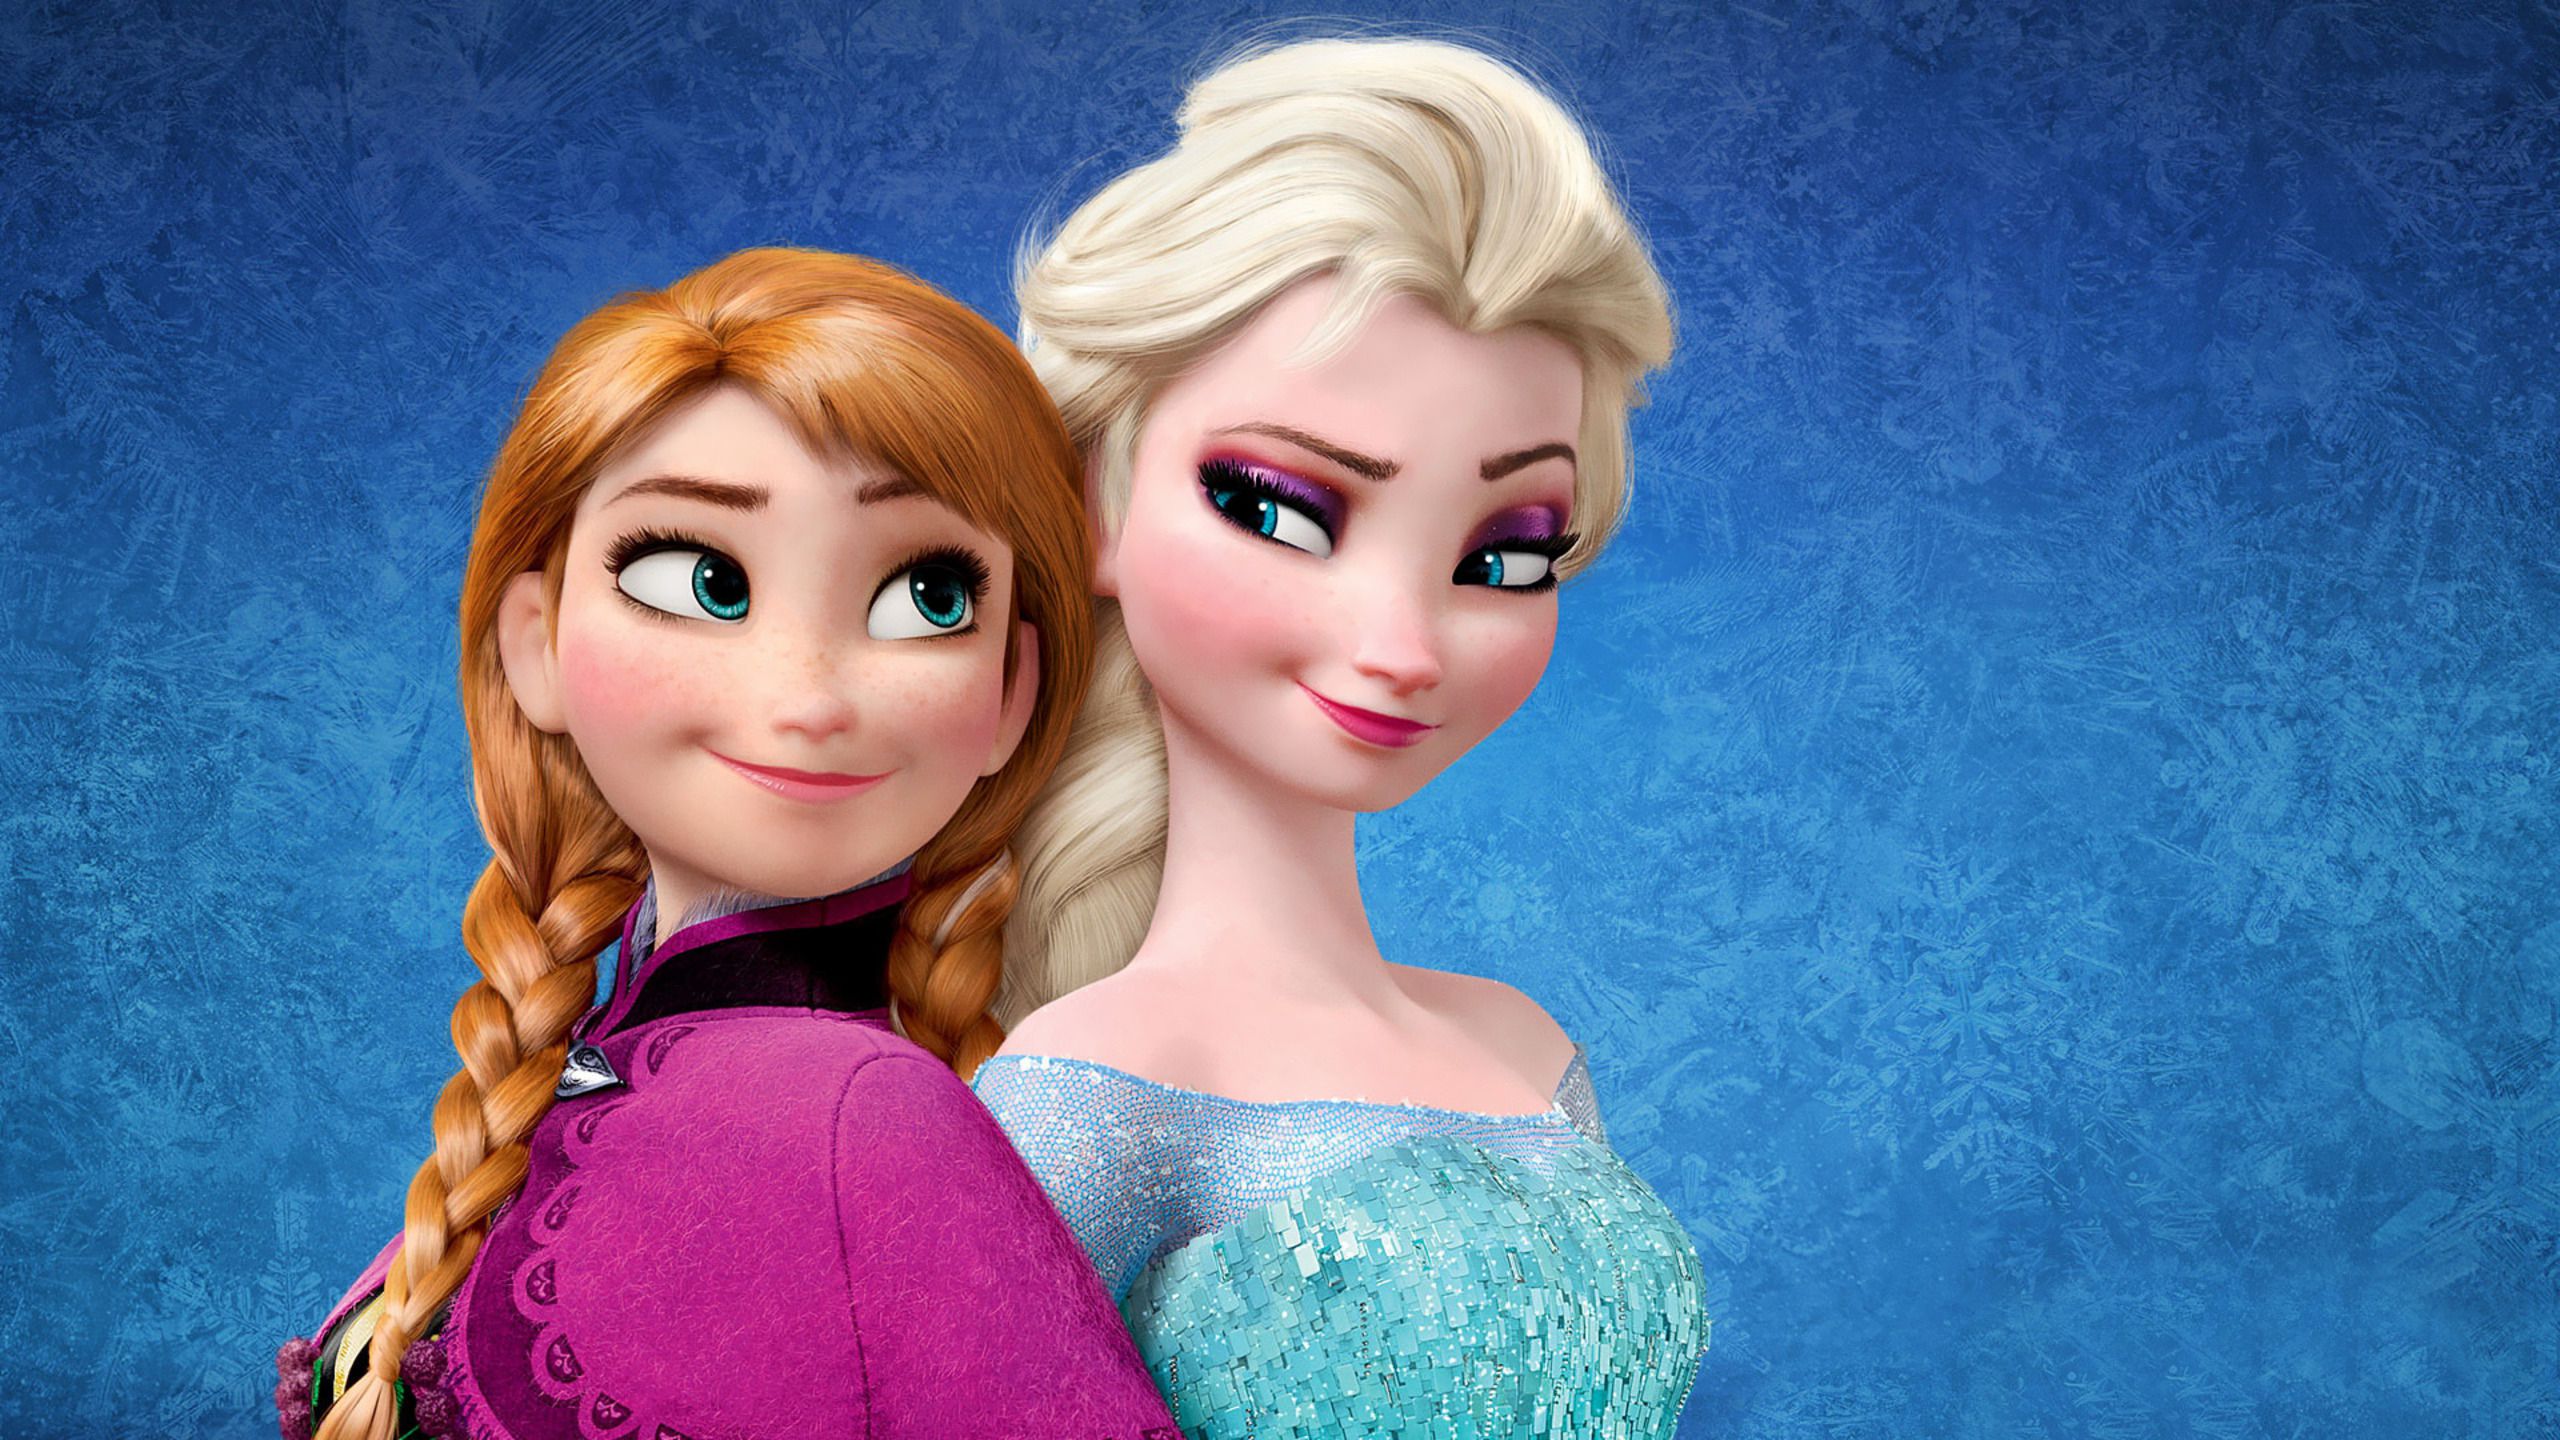 Unofficial Image From 'Frozen 2' Surfaces